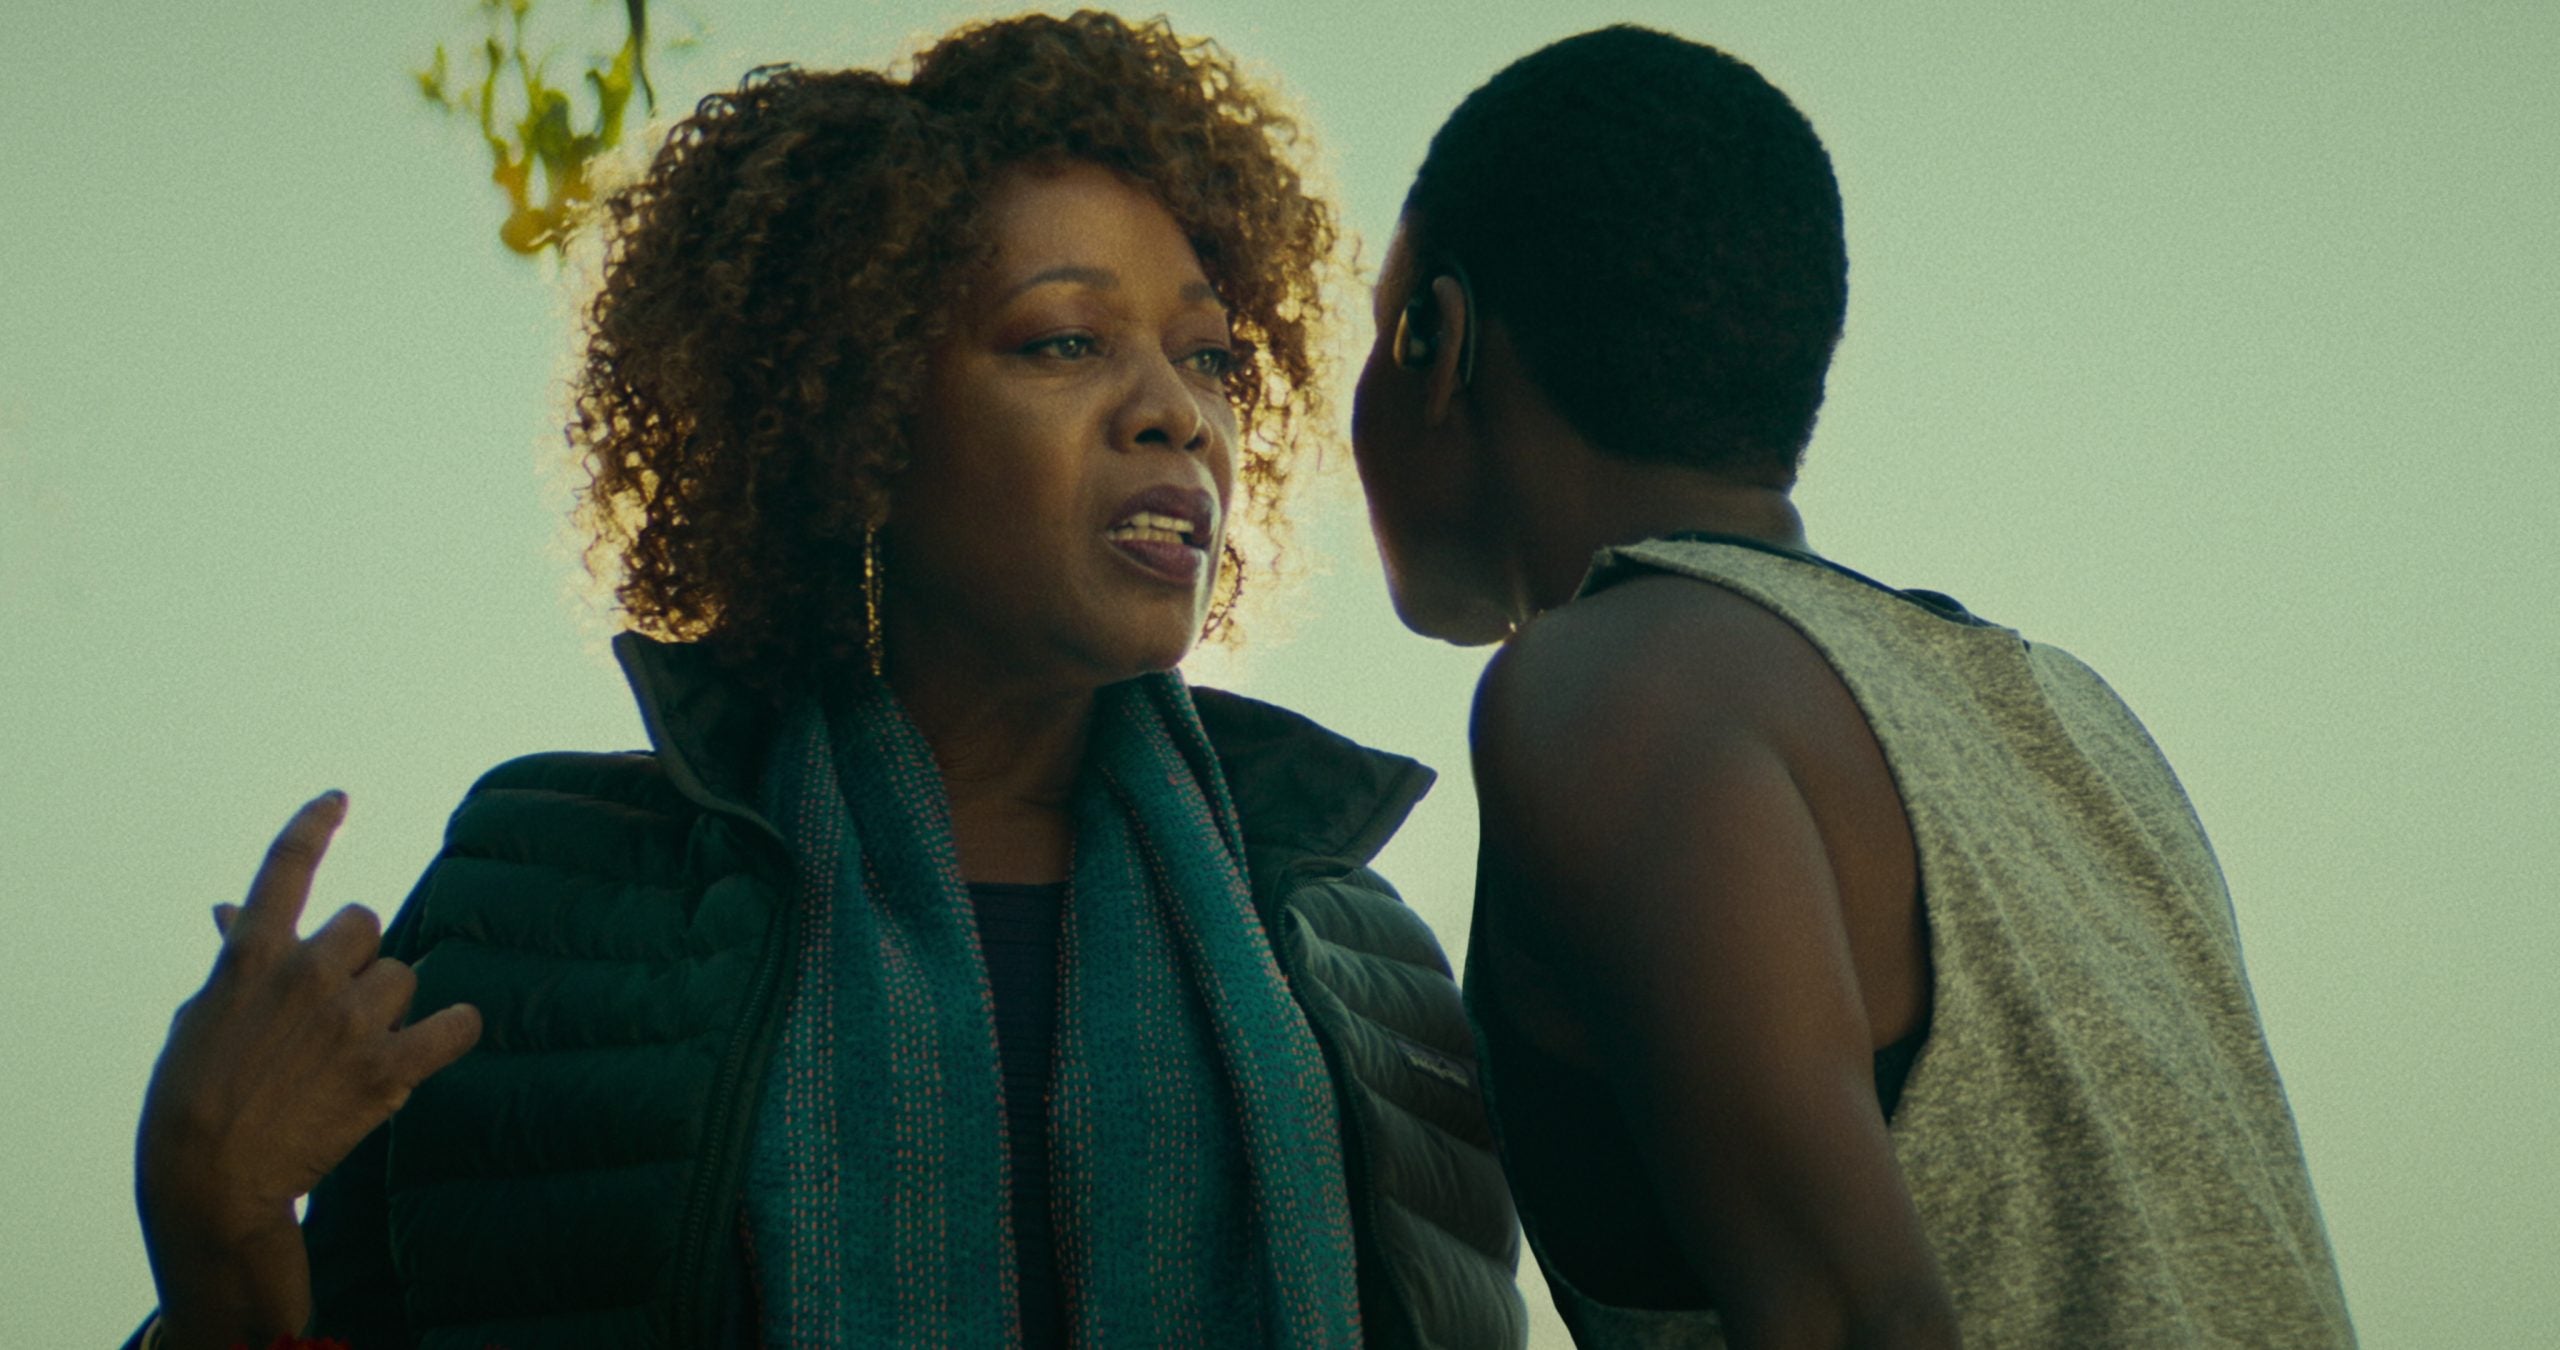 ‘Weathering’ Star Alexis Louder Opens Up On Giving Unheard Black Mothers A Voice In New Netflix Short